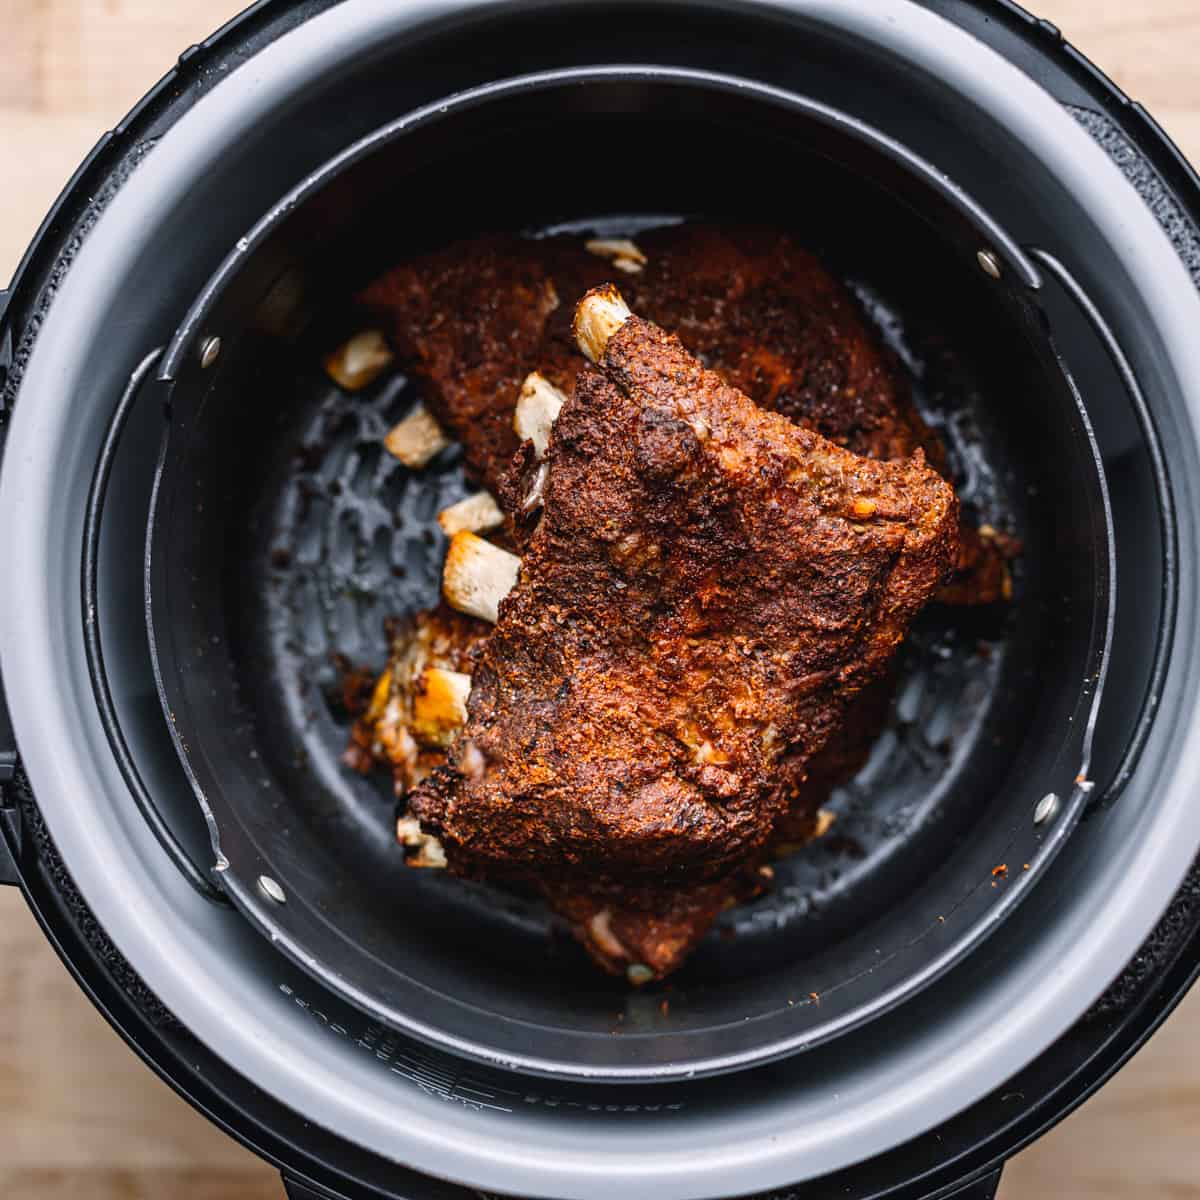 How to Cook Pork Ribs in an Instant Pot or Ninja Foodi